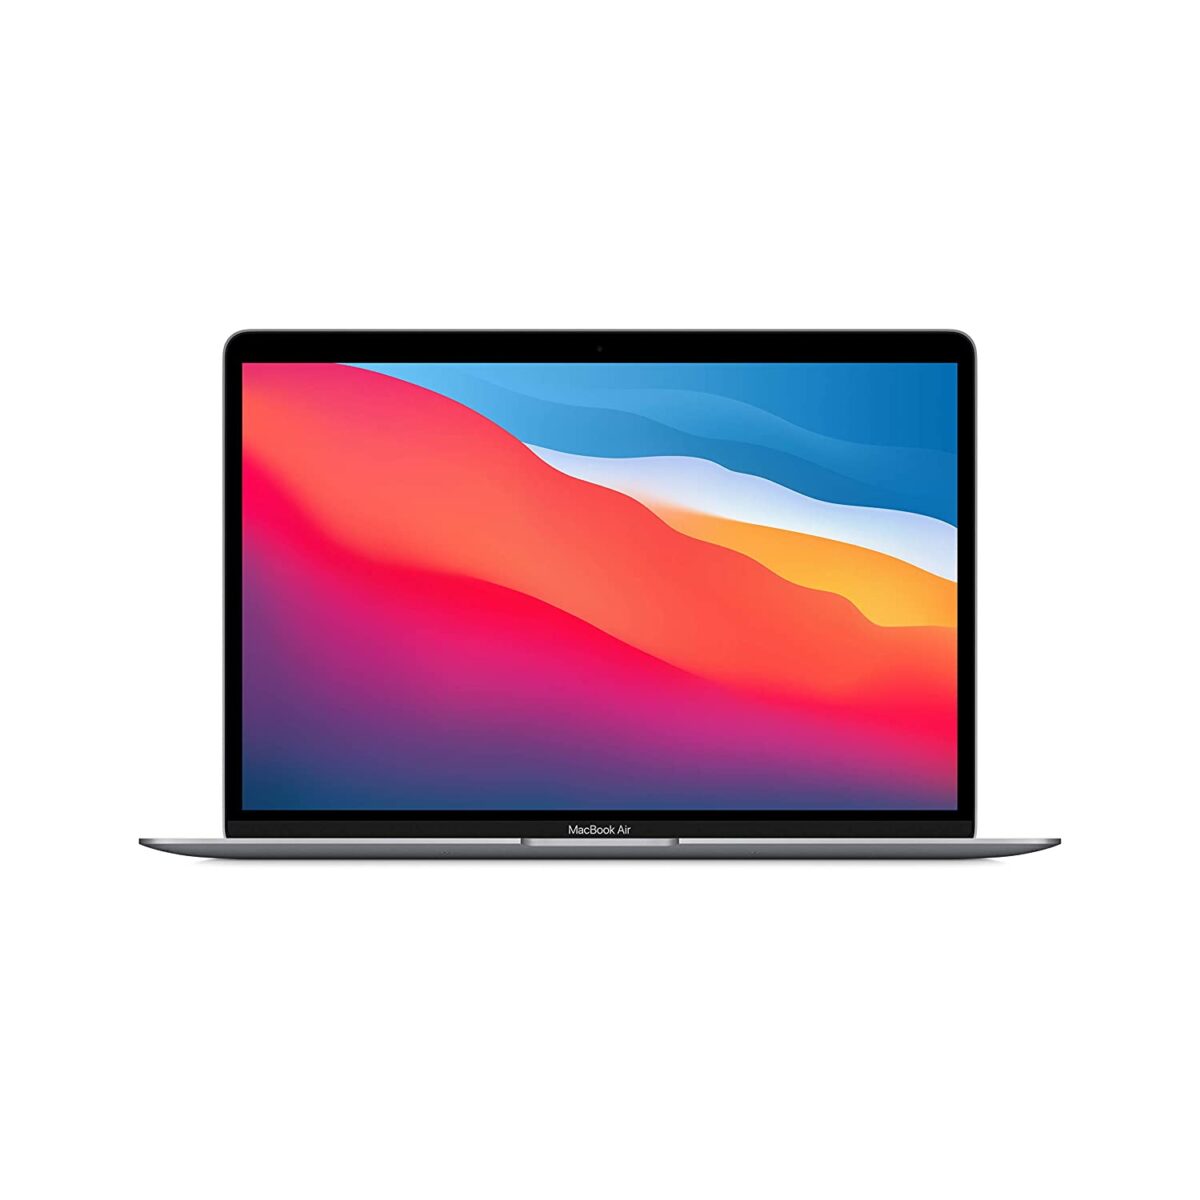 Is it worth buying an Apple M1 Macbook Air 13 in 2023-2024